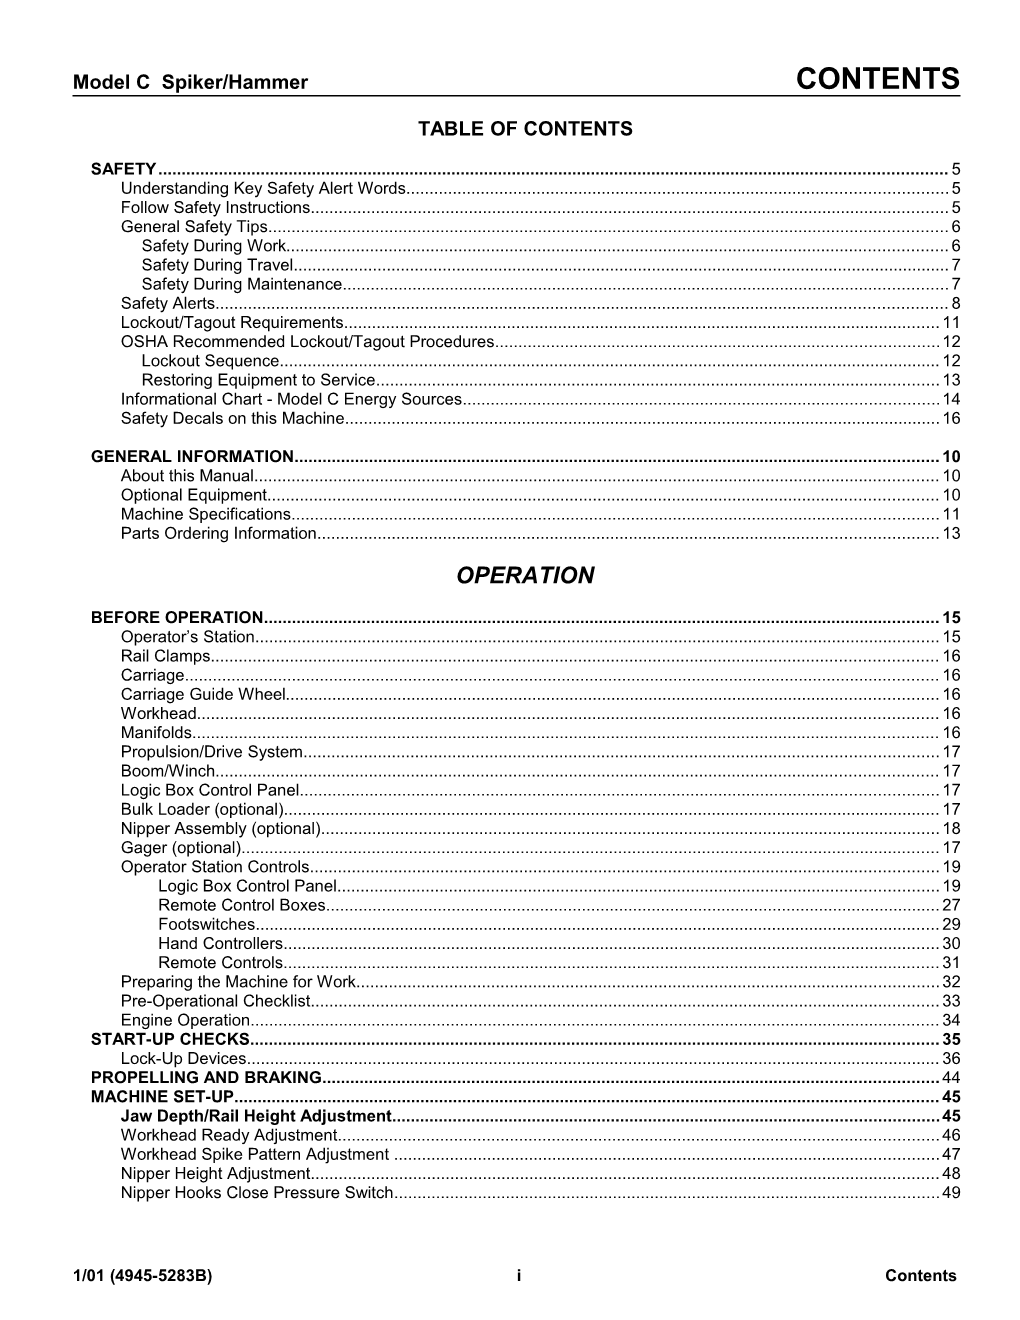 Table of Contents s316